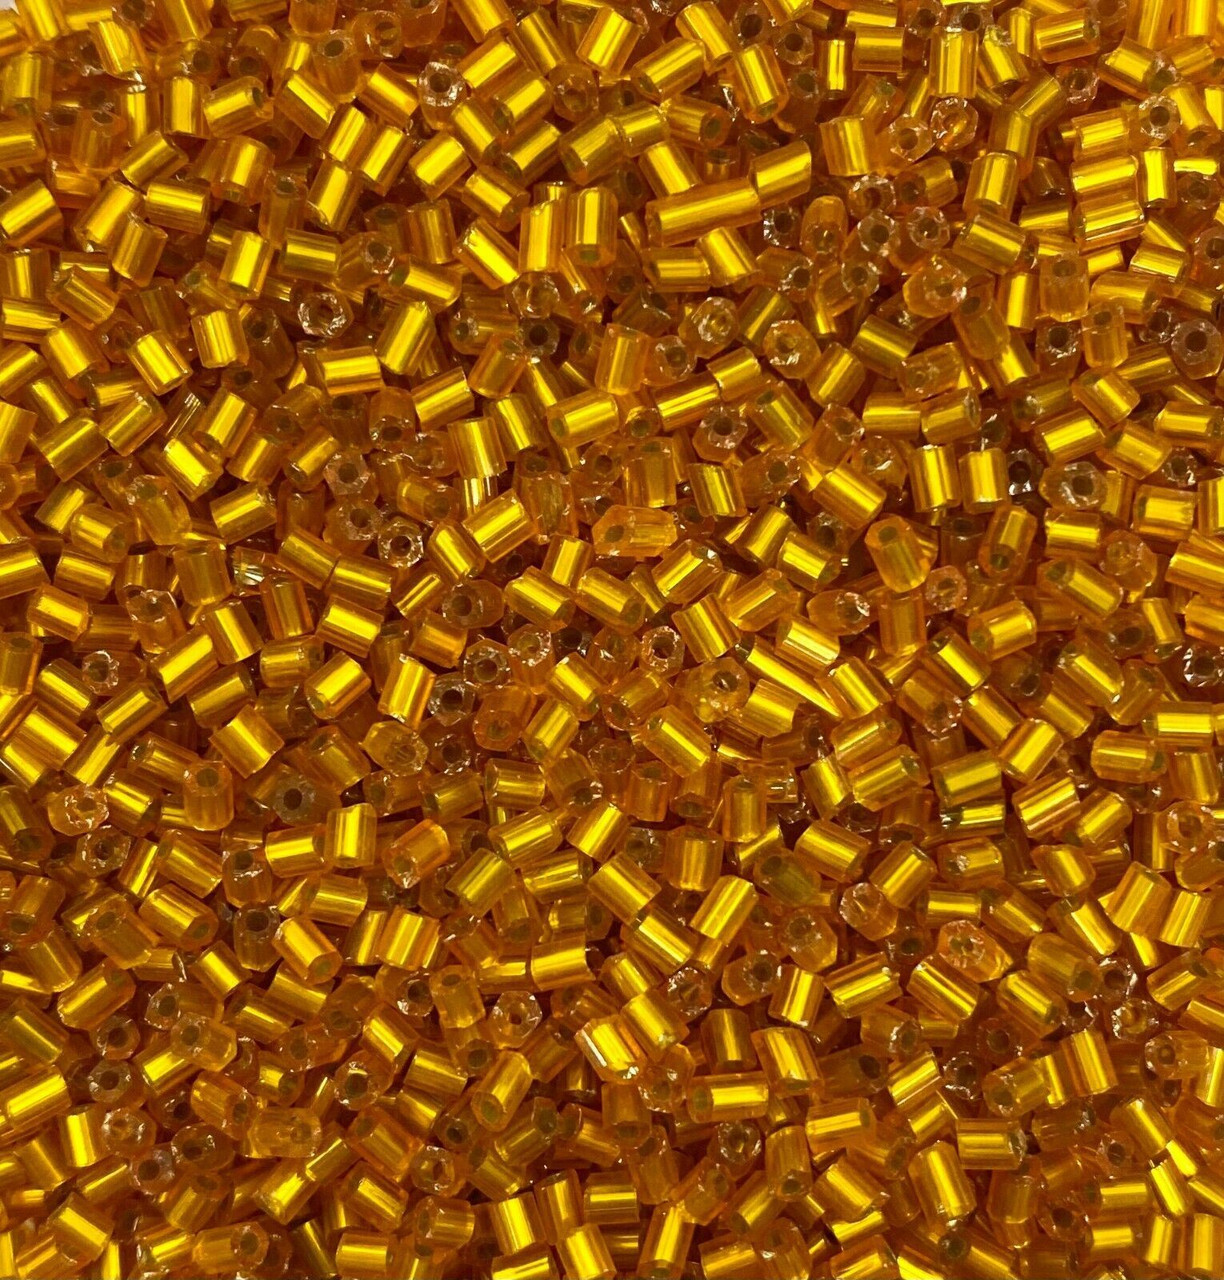 50g glass HEX seed beads - Orange Silver-Lined, size 11/0 (approx 2mm)